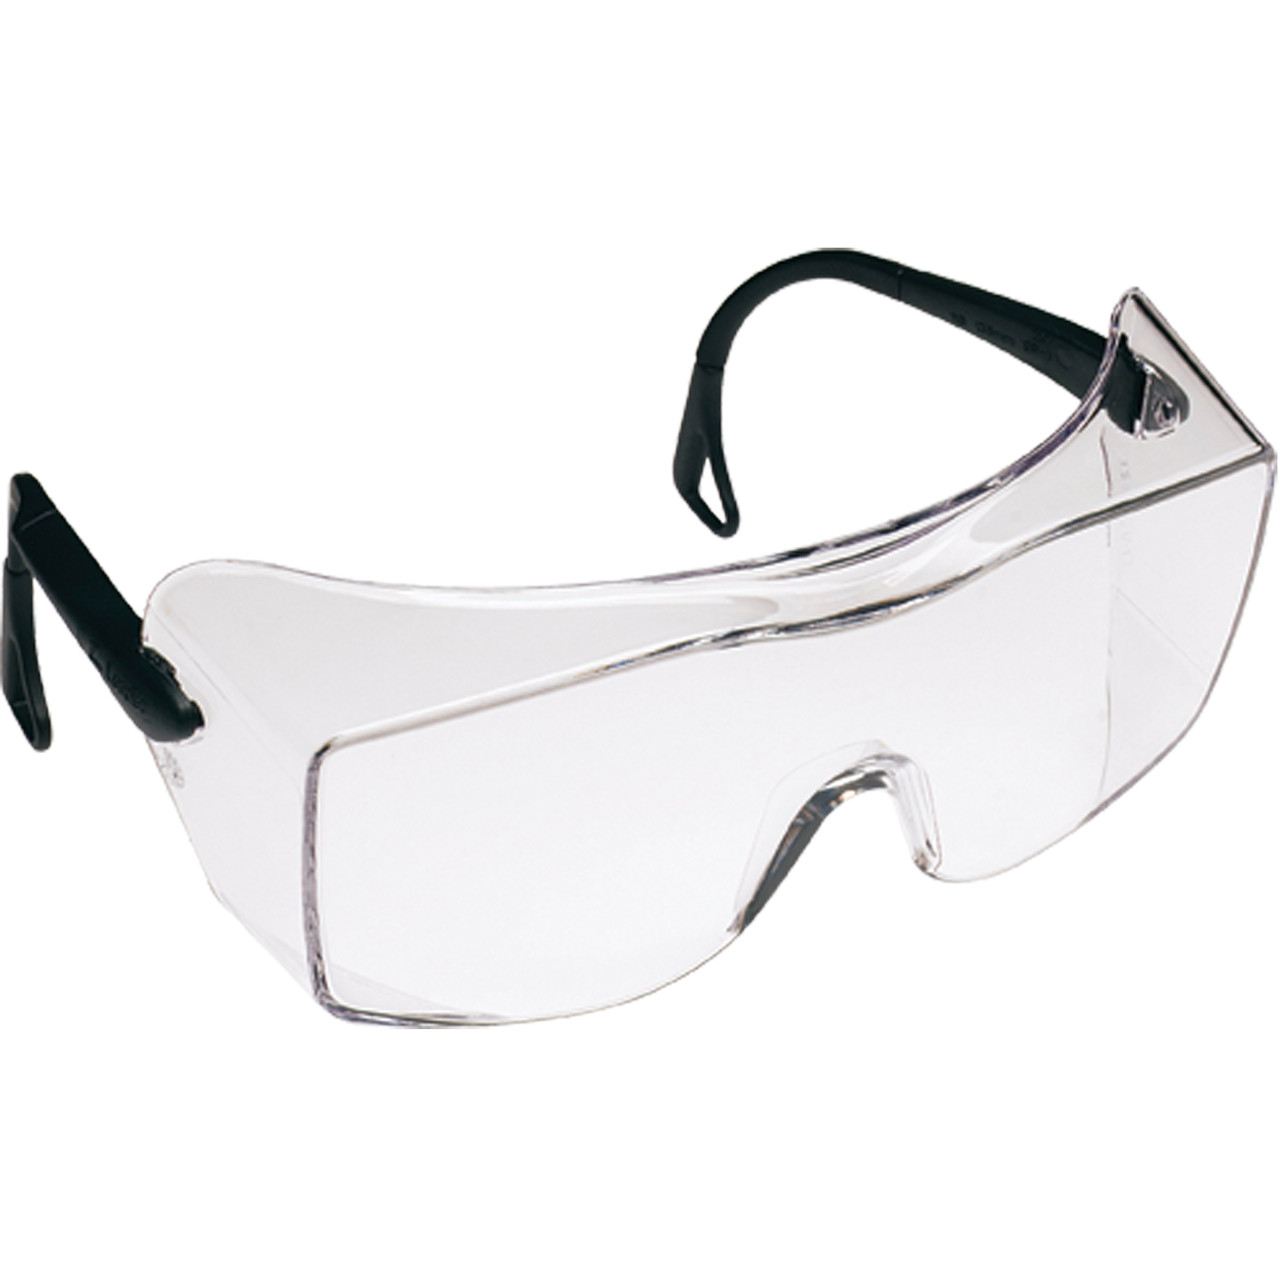 OX® Safety Glasses w/Clear Lens  12166-00000-20